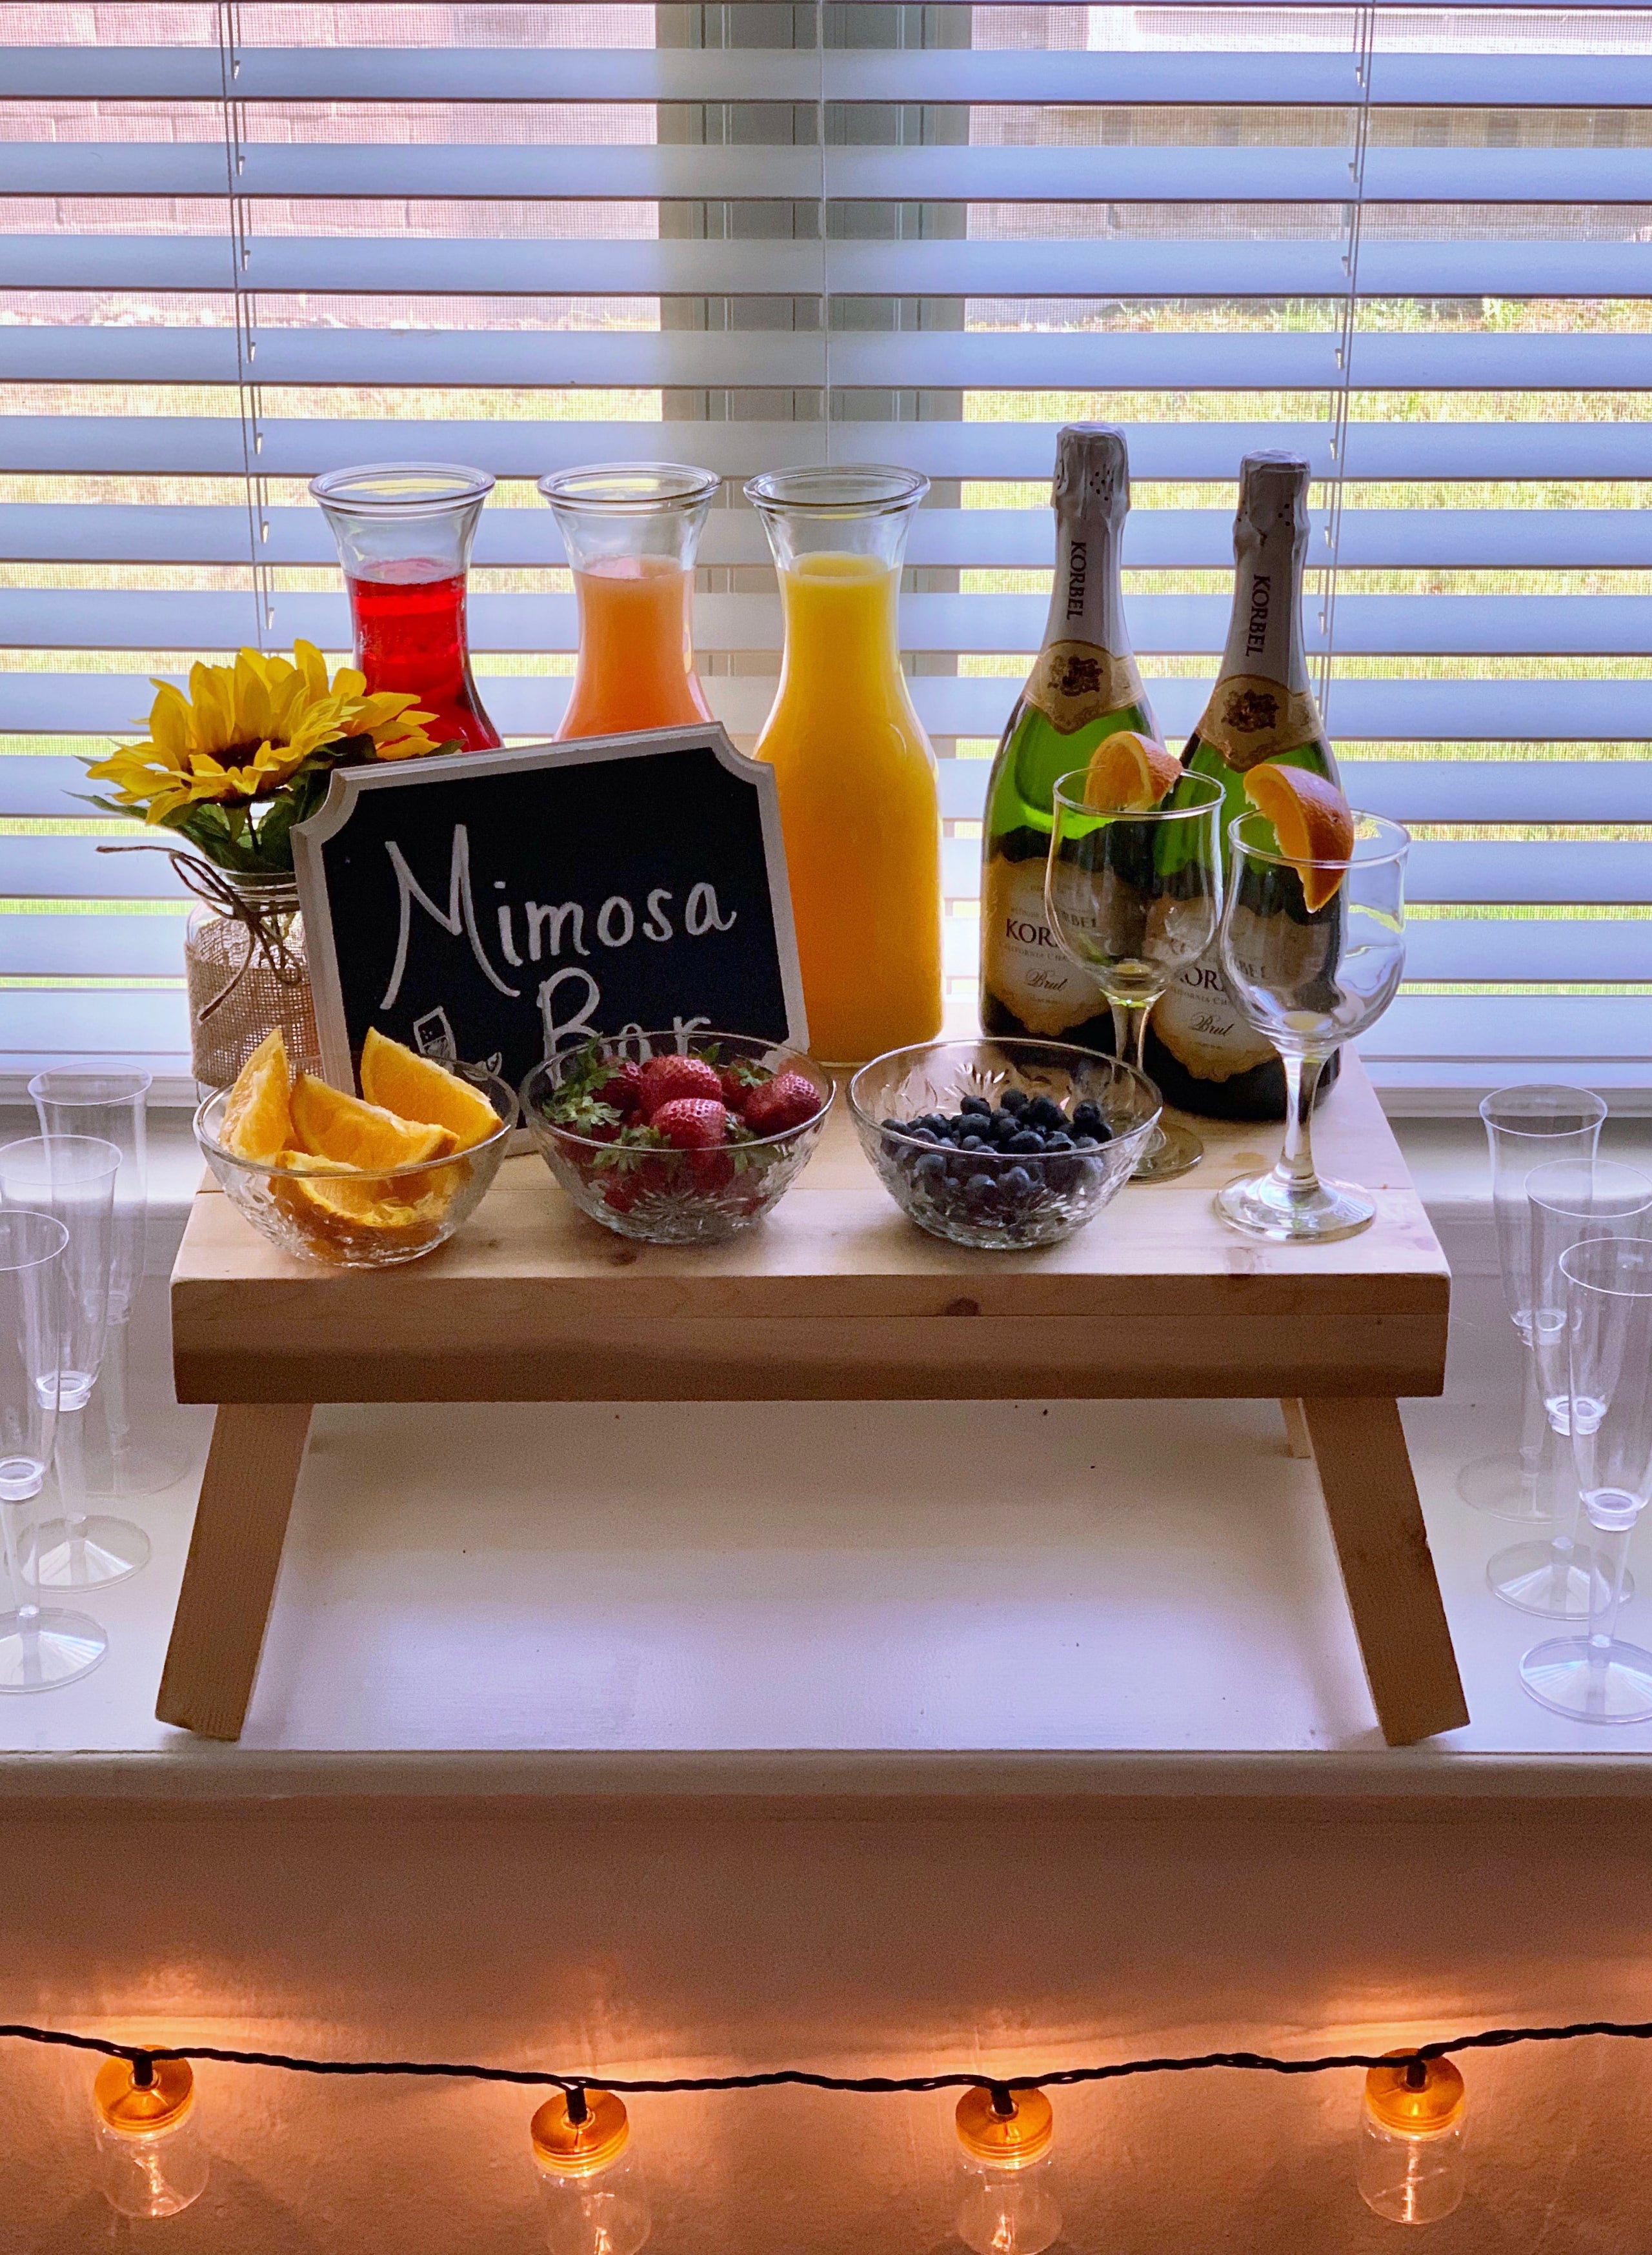 Let's Brunch!' Mimosa Bar Kit 14ct - The Ultimate Party and Rental Store